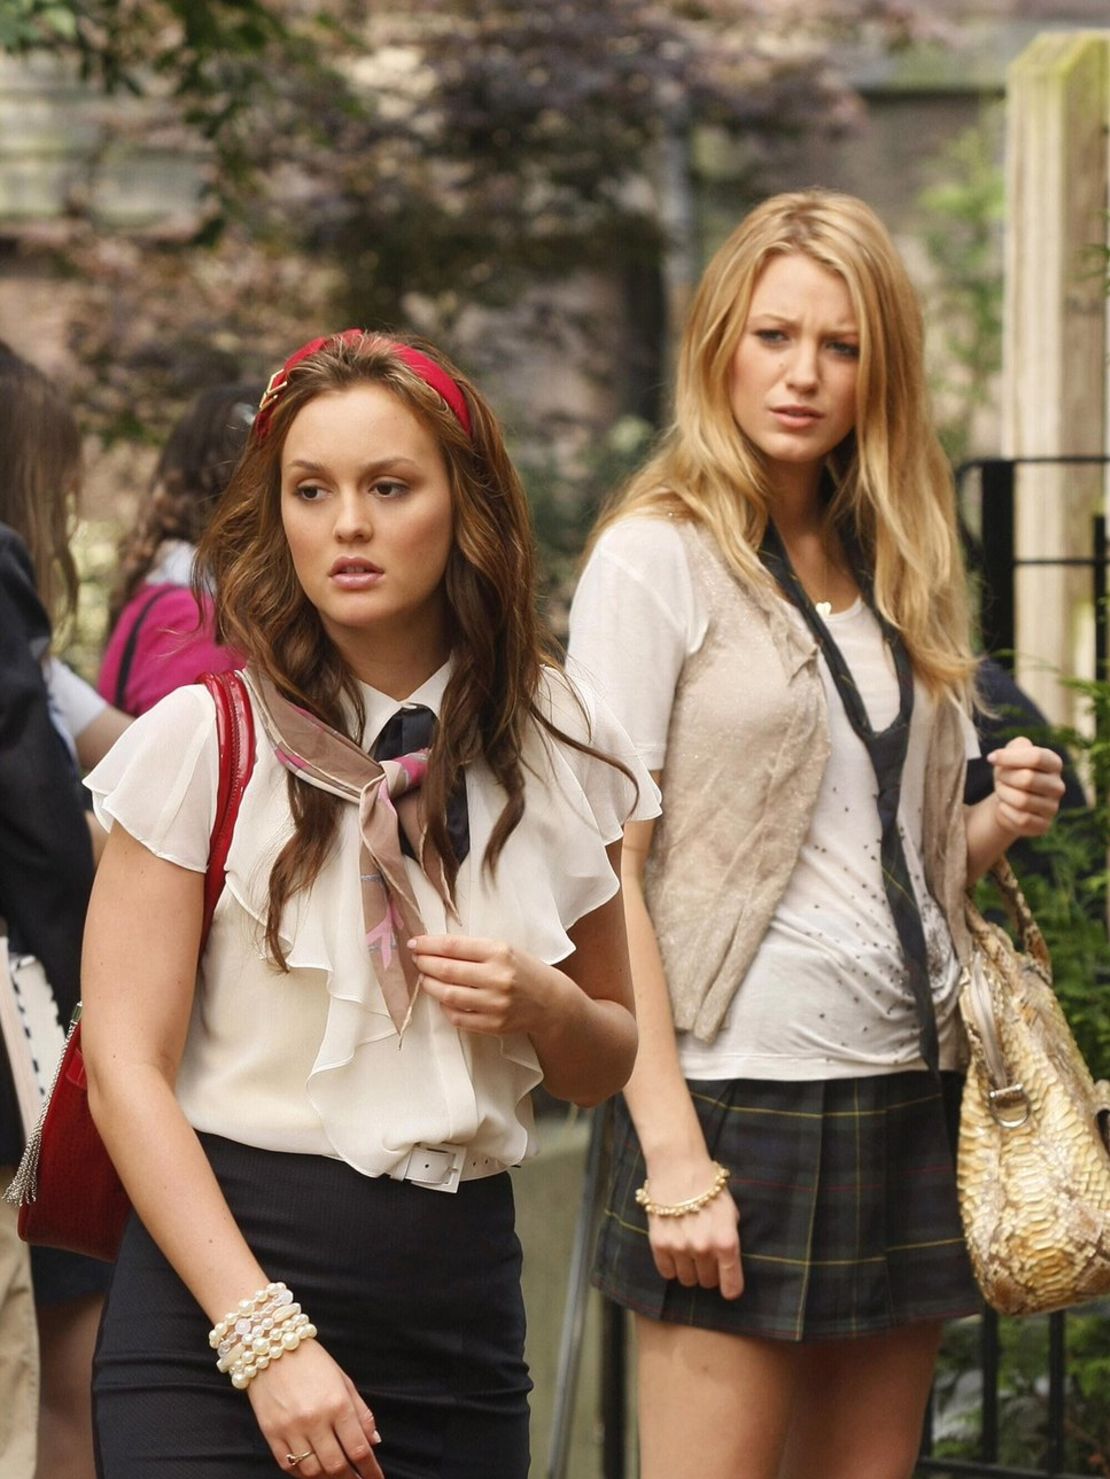 Blair (Leighton Meester) and Serena (Blake Lively) wore school uniforms a lot during the series' first two seasons.